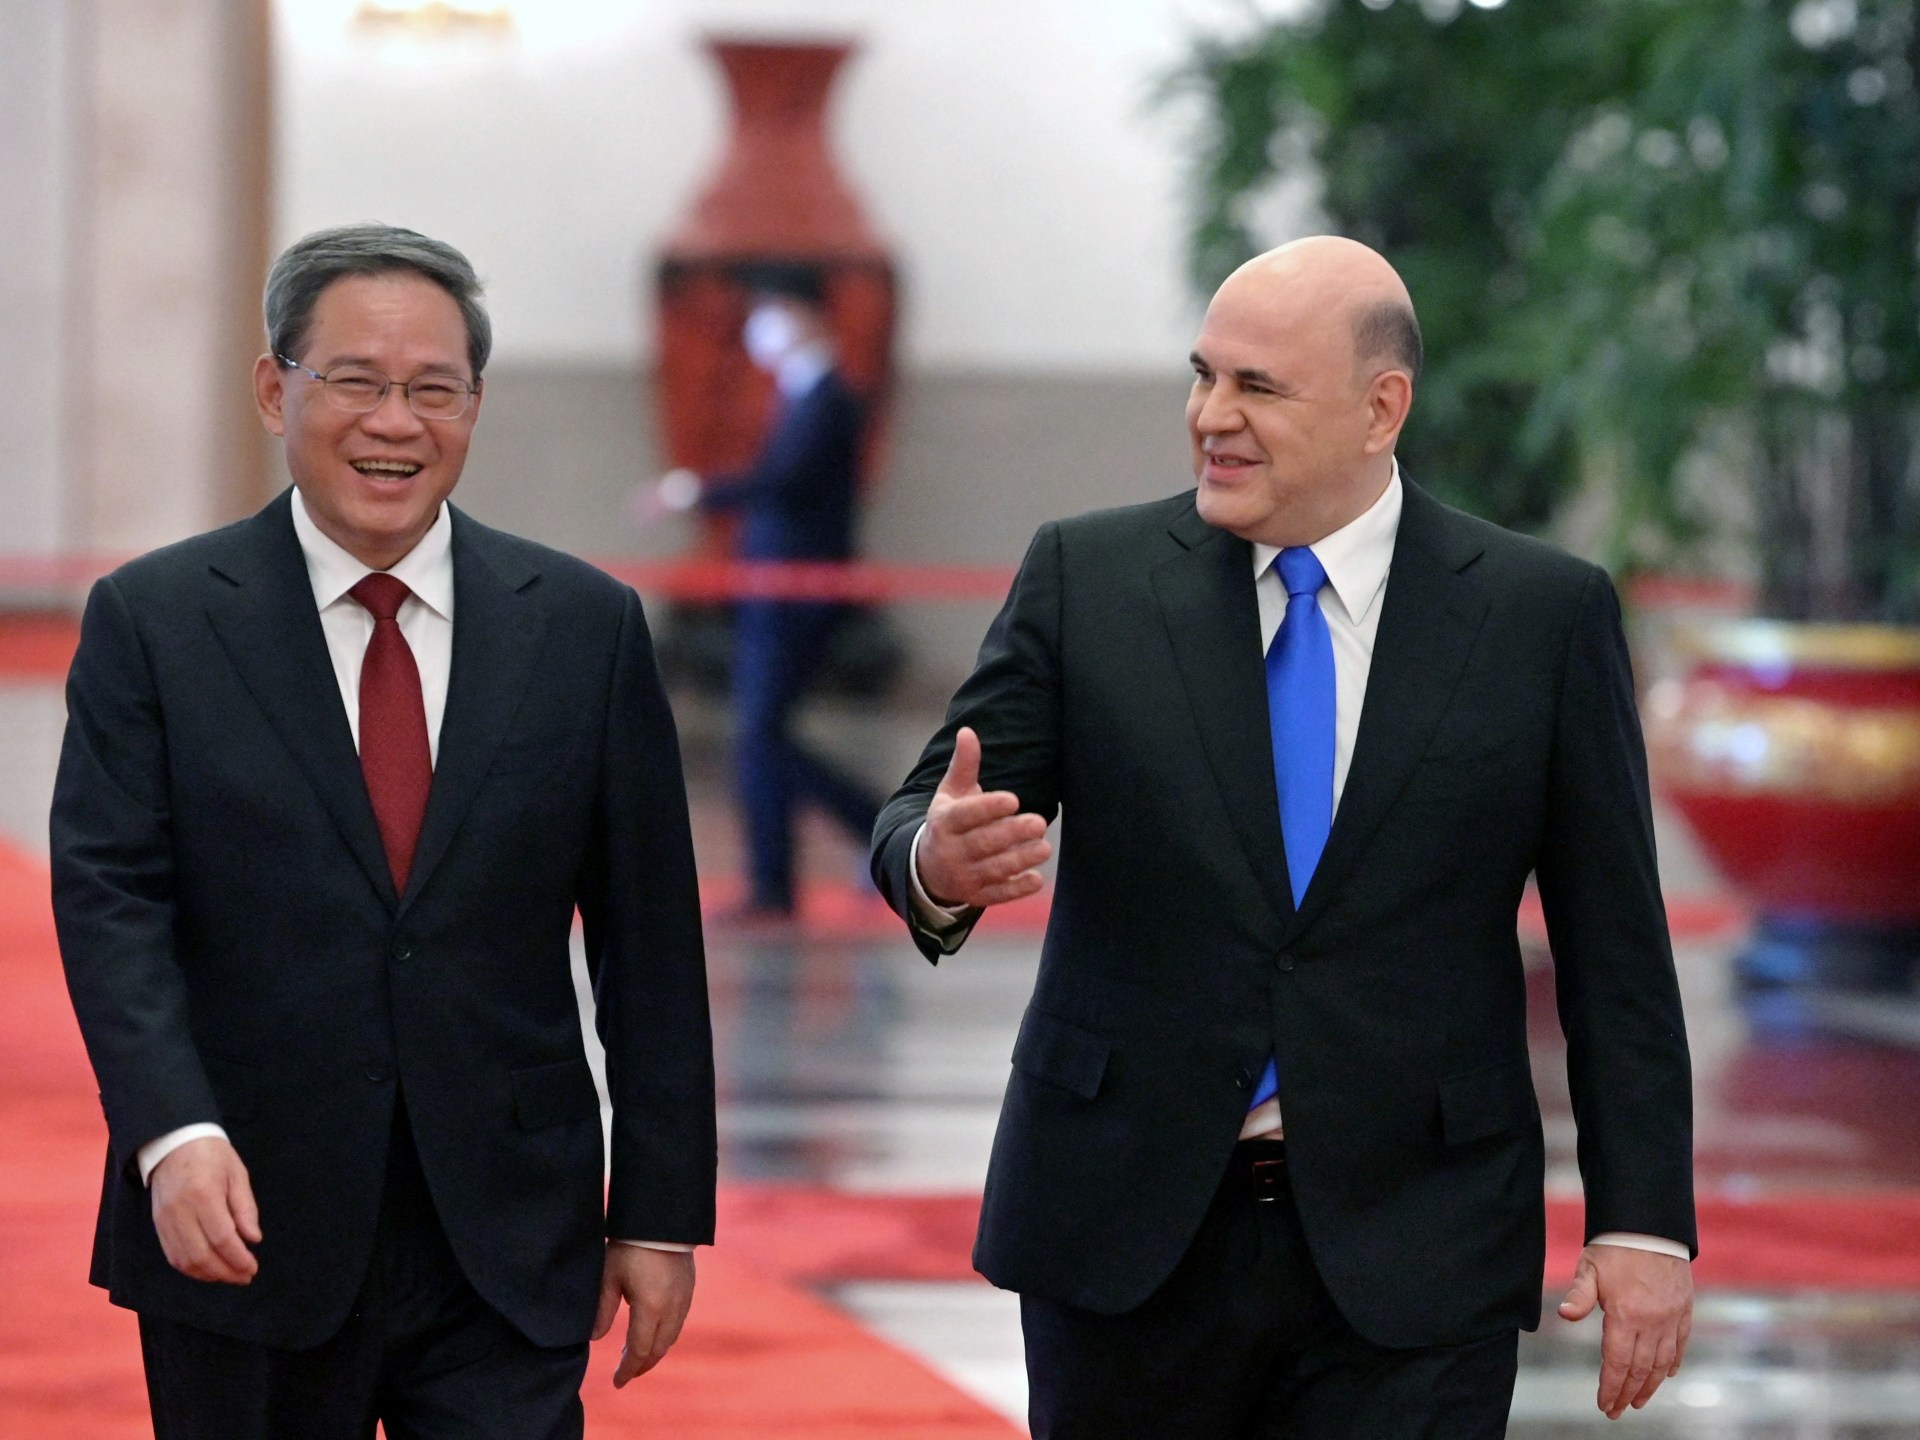 Russia, China sign new agreements, defying Western criticism | Russia-Ukraine war News